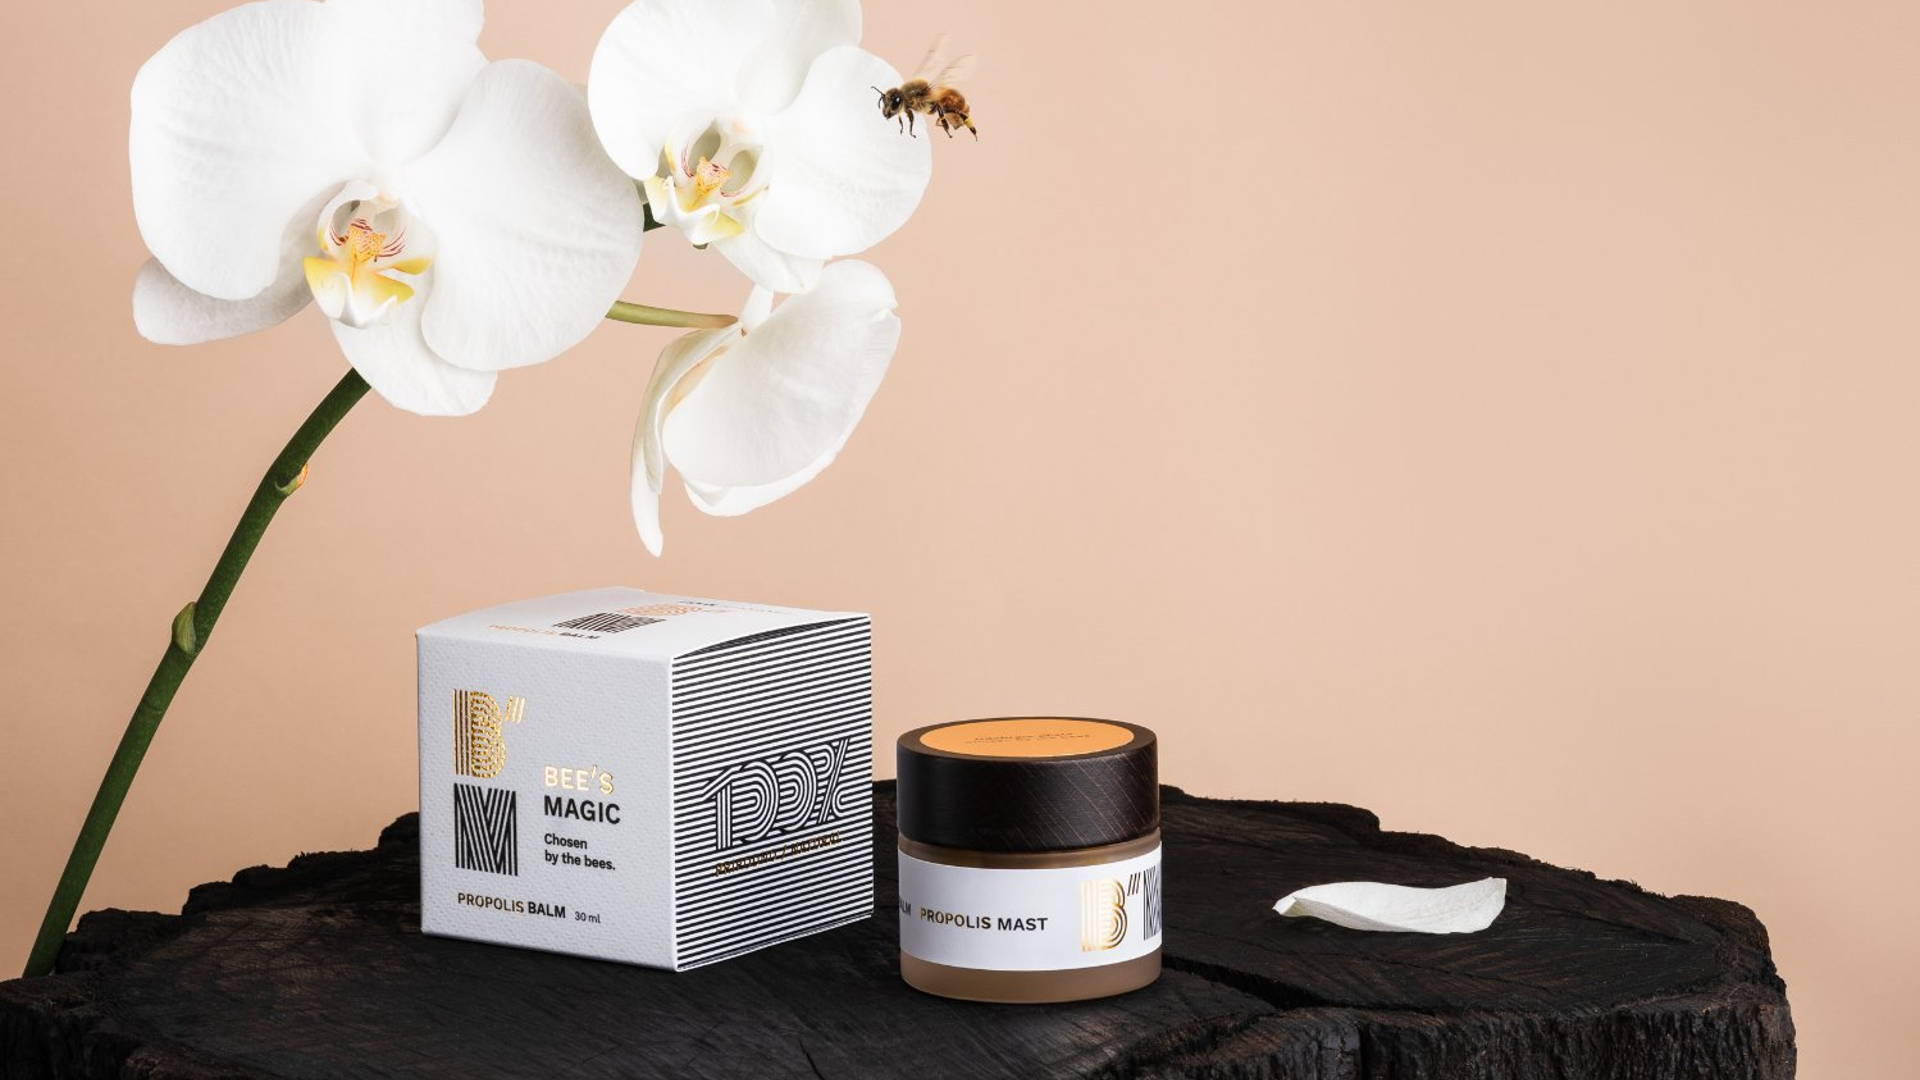 Featured image for A Premium and Unisex Design Bee's Magic Propolis Balm